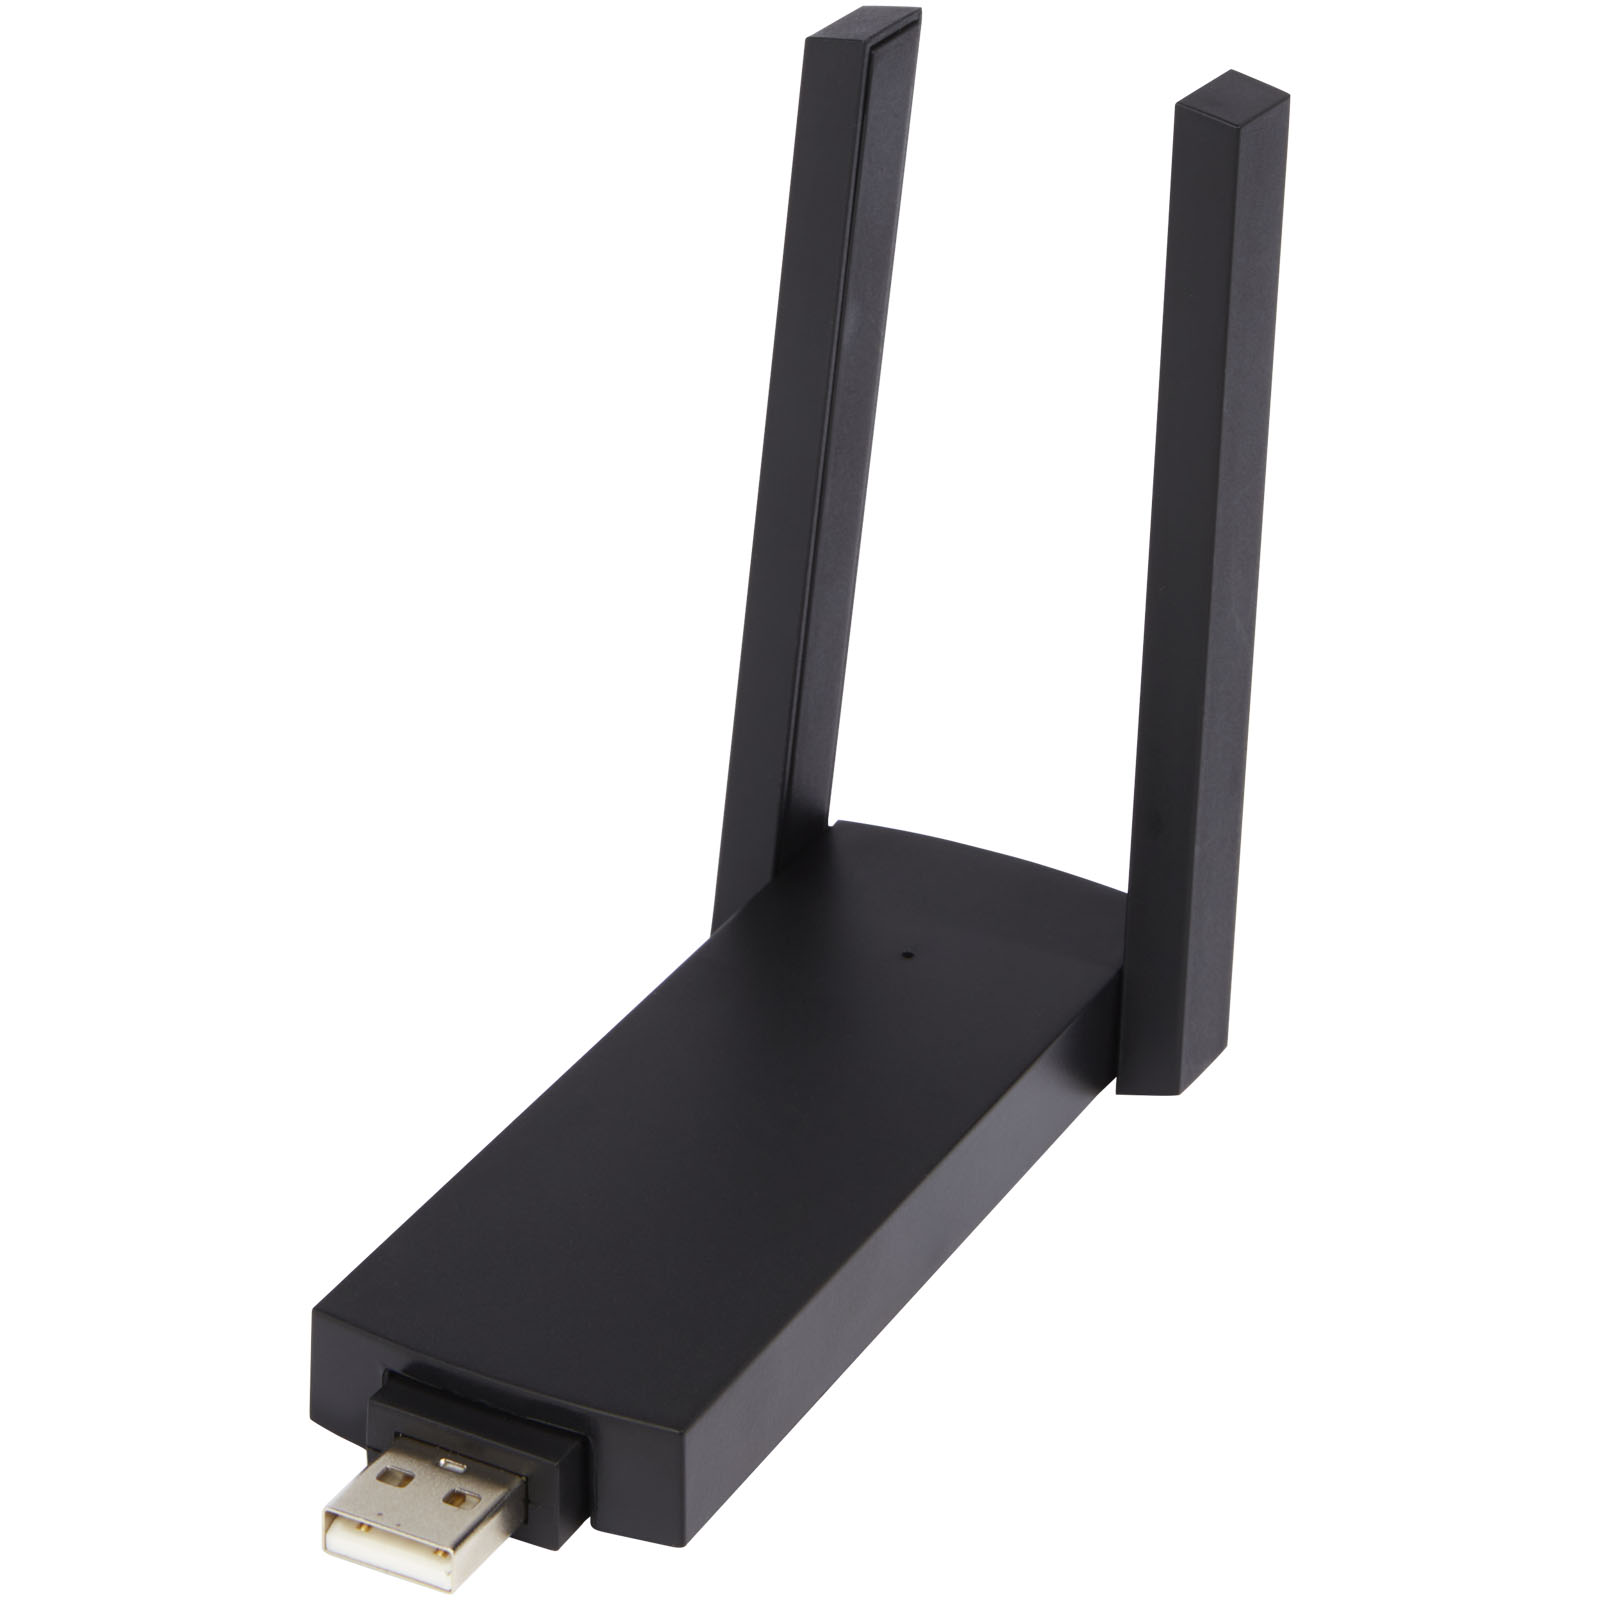 Advertising Computer Accessories - ADAPT single band Wi-Fi extender - 0